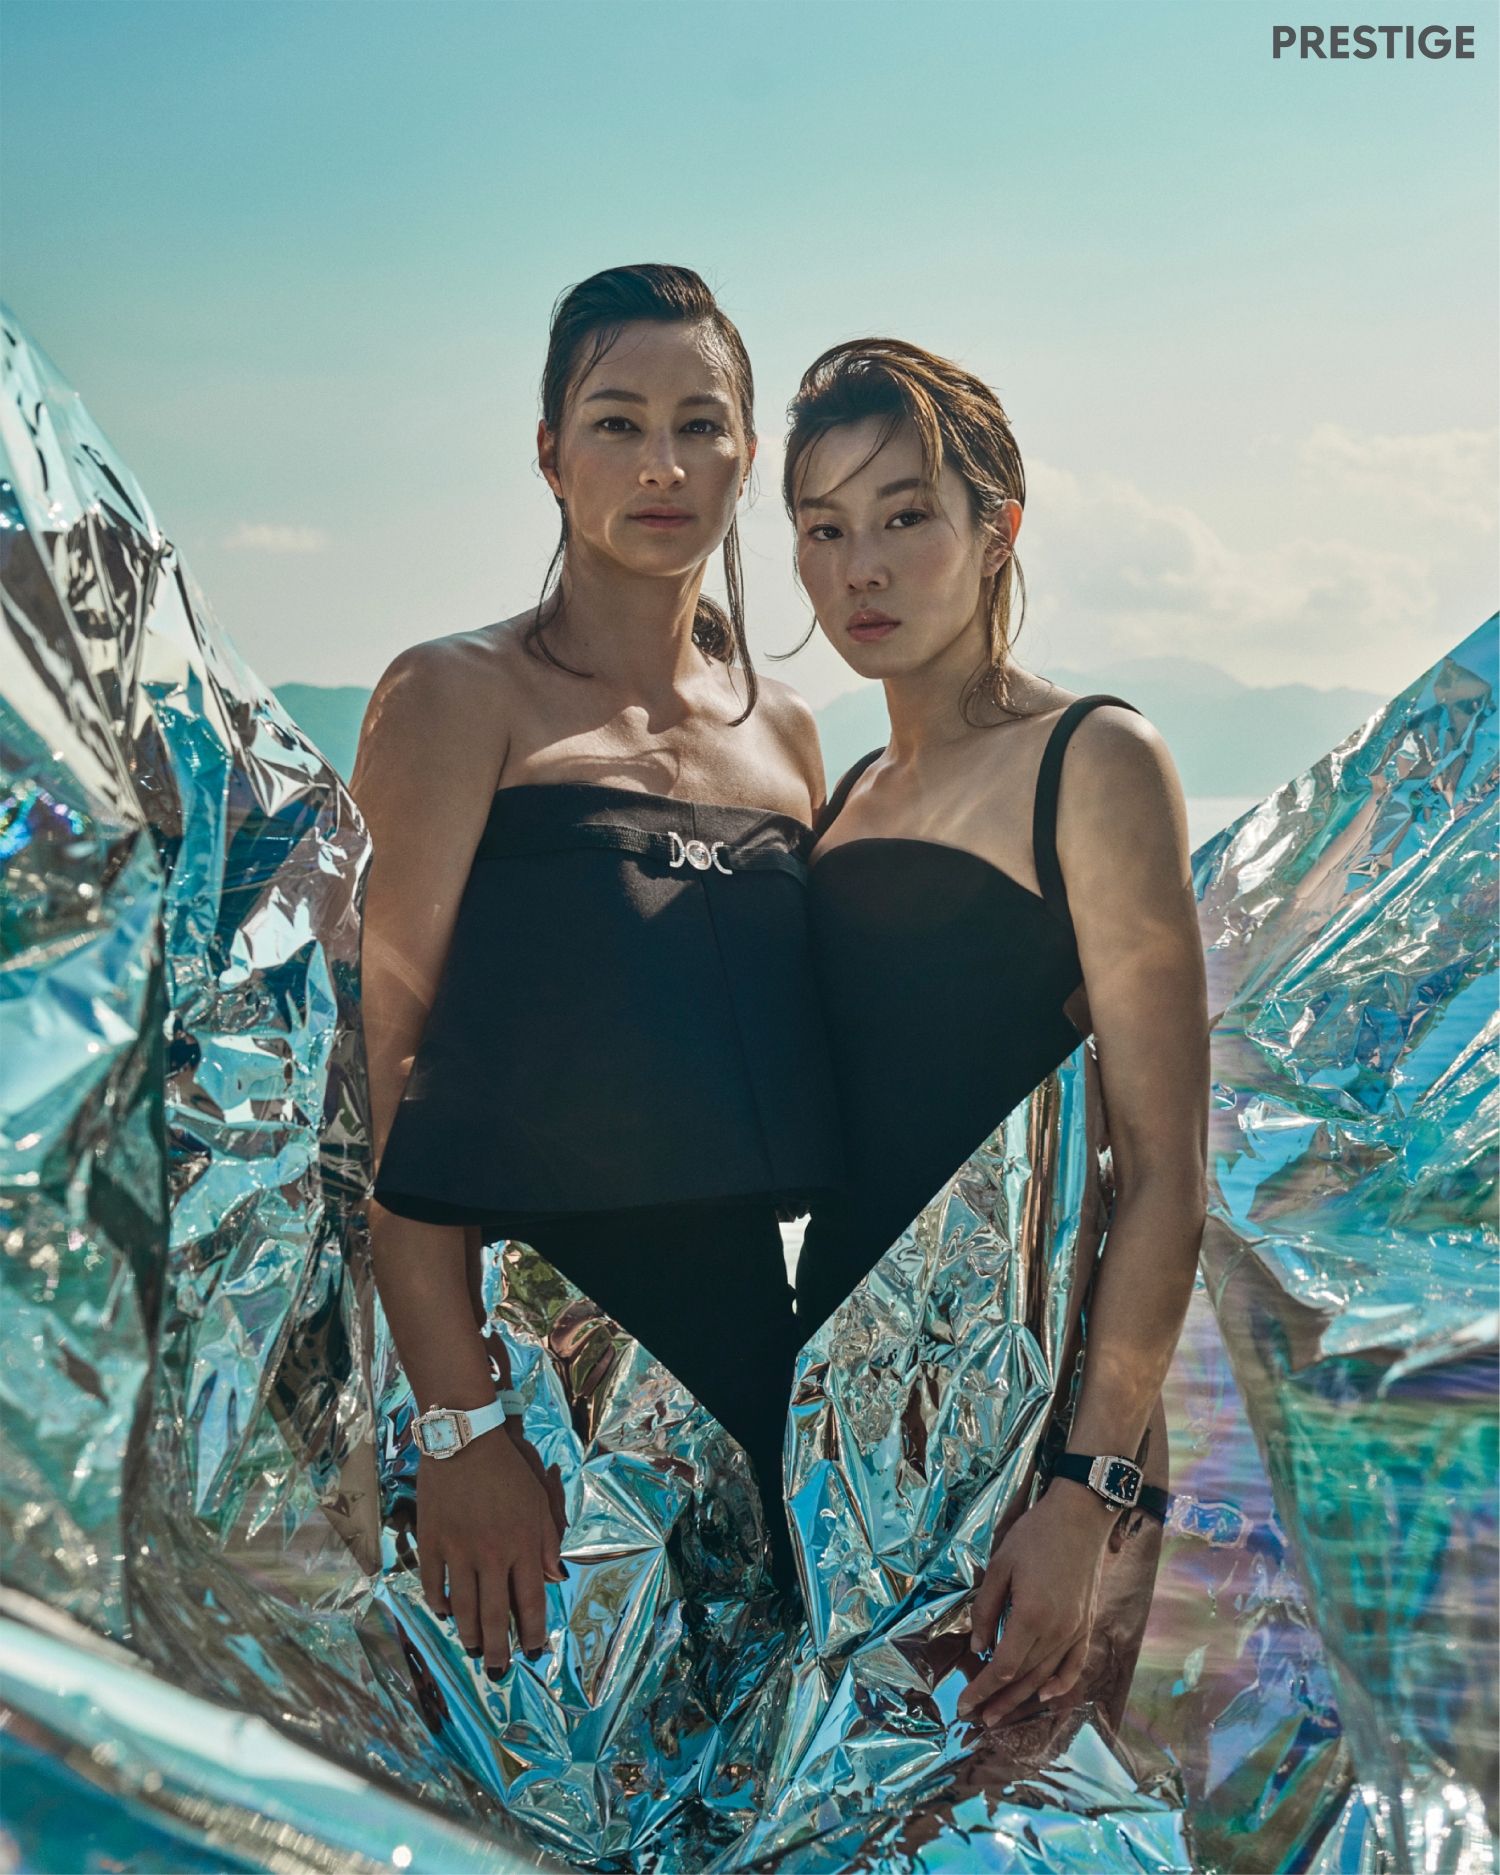 Prestige Hong Kong cover story Stephanie Au and Camille Cheng